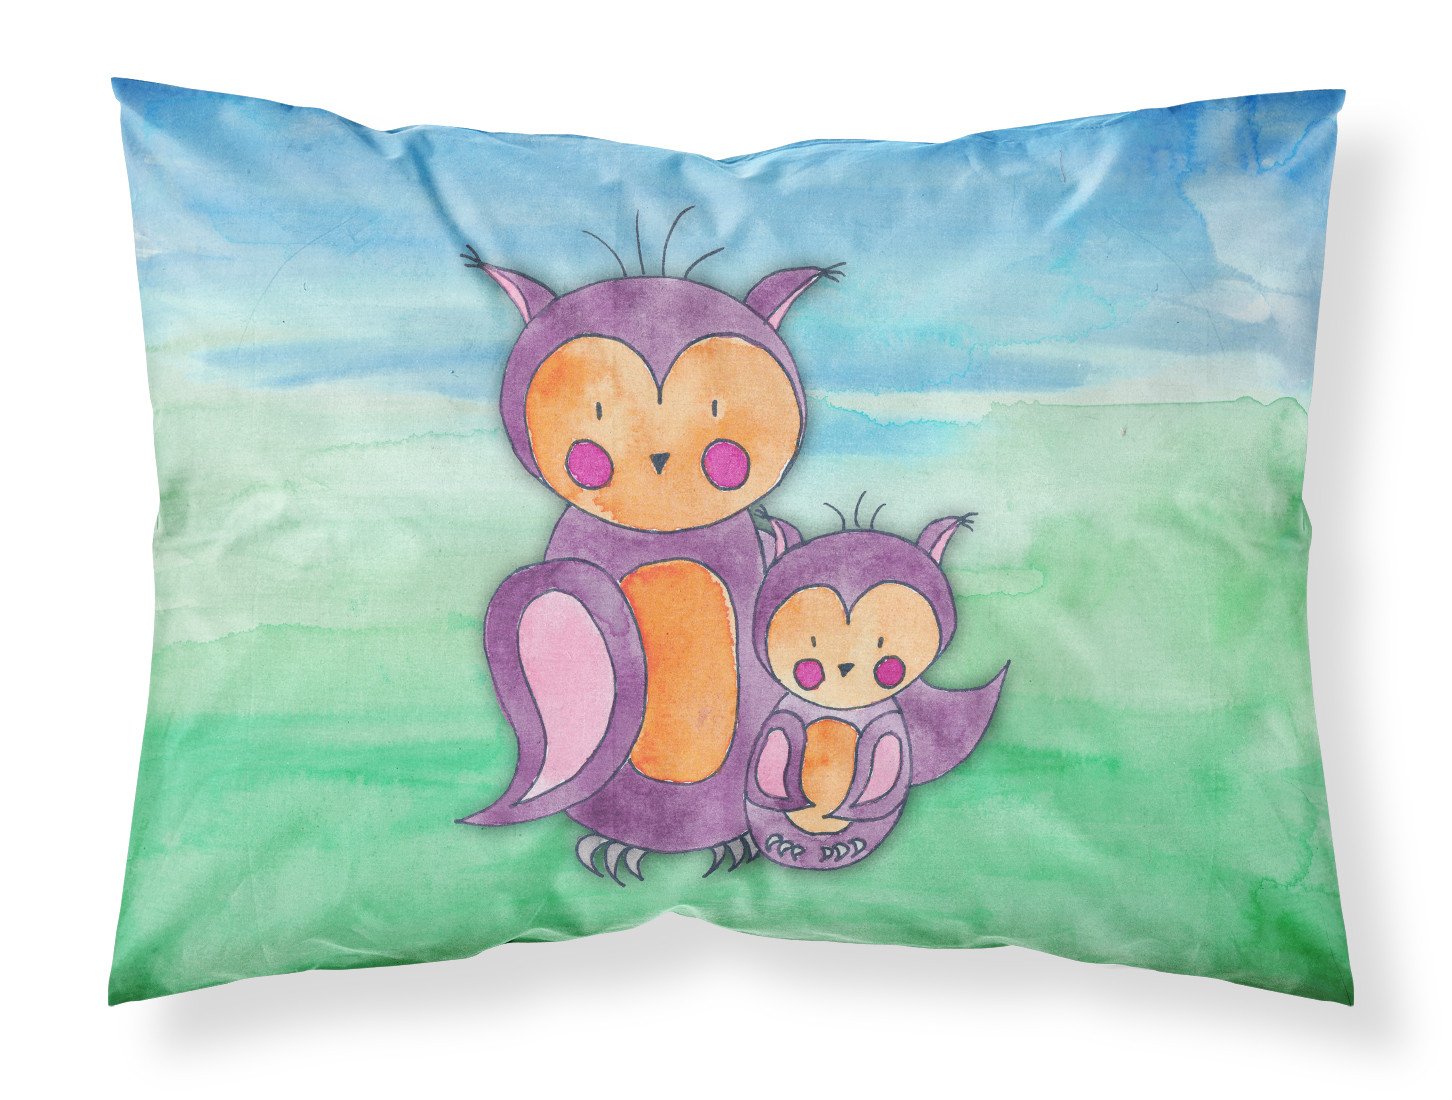 Momma and Baby Owl Watercolor Fabric Standard Pillowcase BB7430PILLOWCASE by Caroline's Treasures